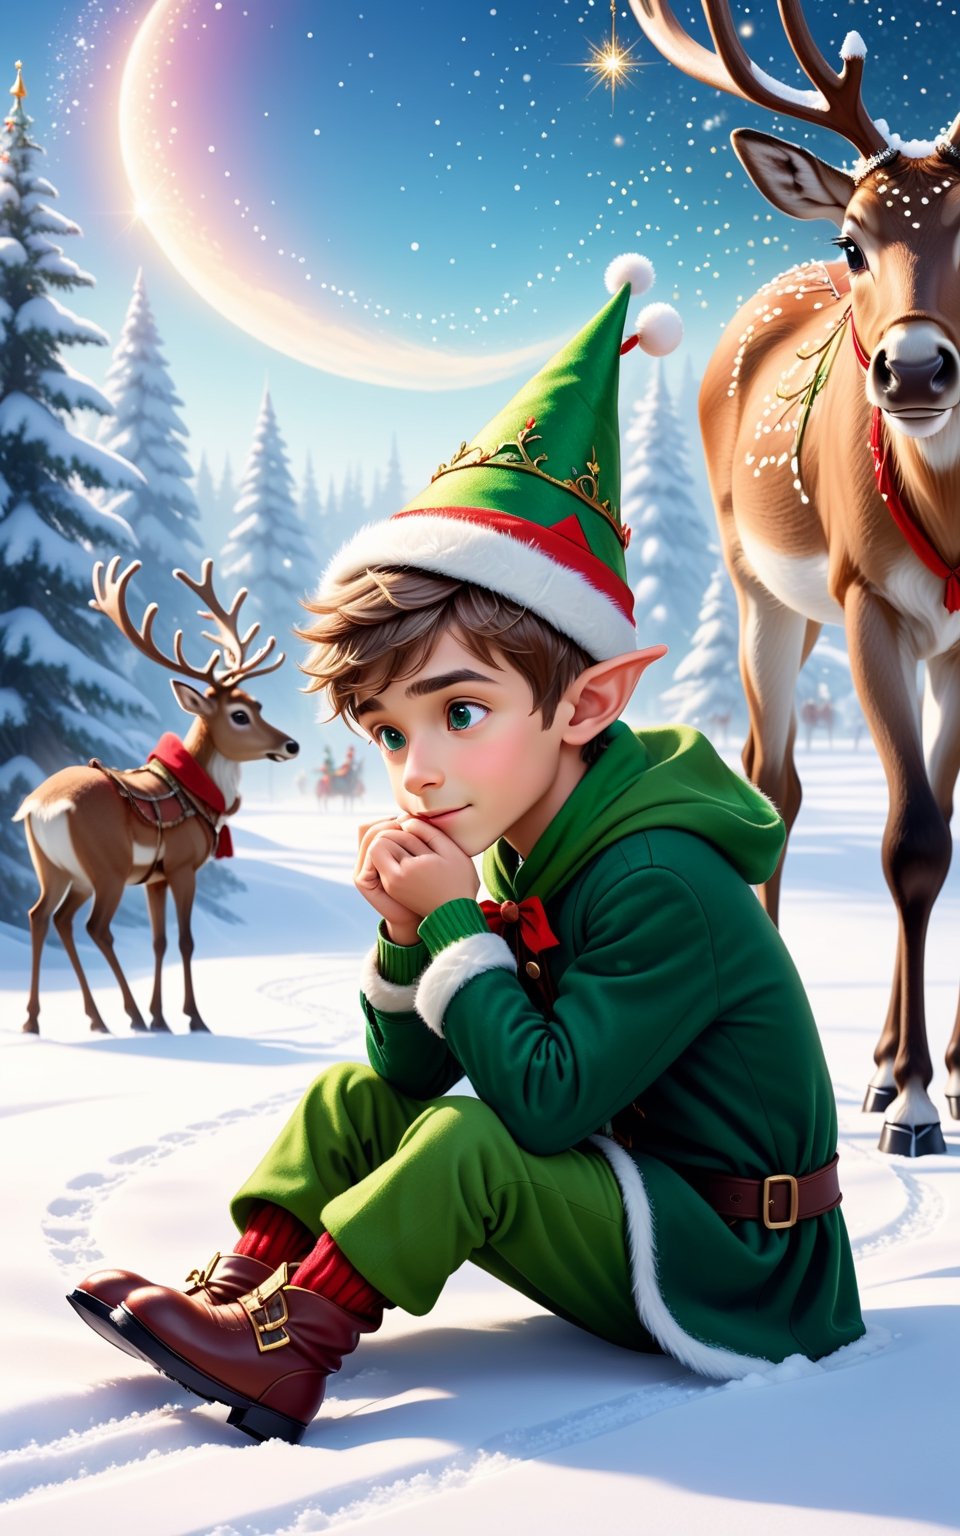 A cute and lifelike elf boy with elf ears, dressed in stylish winter clothes inspired by Juicy Couture fashion, sits on the snowy ground scratching his ear, watching in wonder to the distance. A Santa Claus carriage flies by in the background, its reindeer leaving a trail of sparkling magic behind them, Mysterious